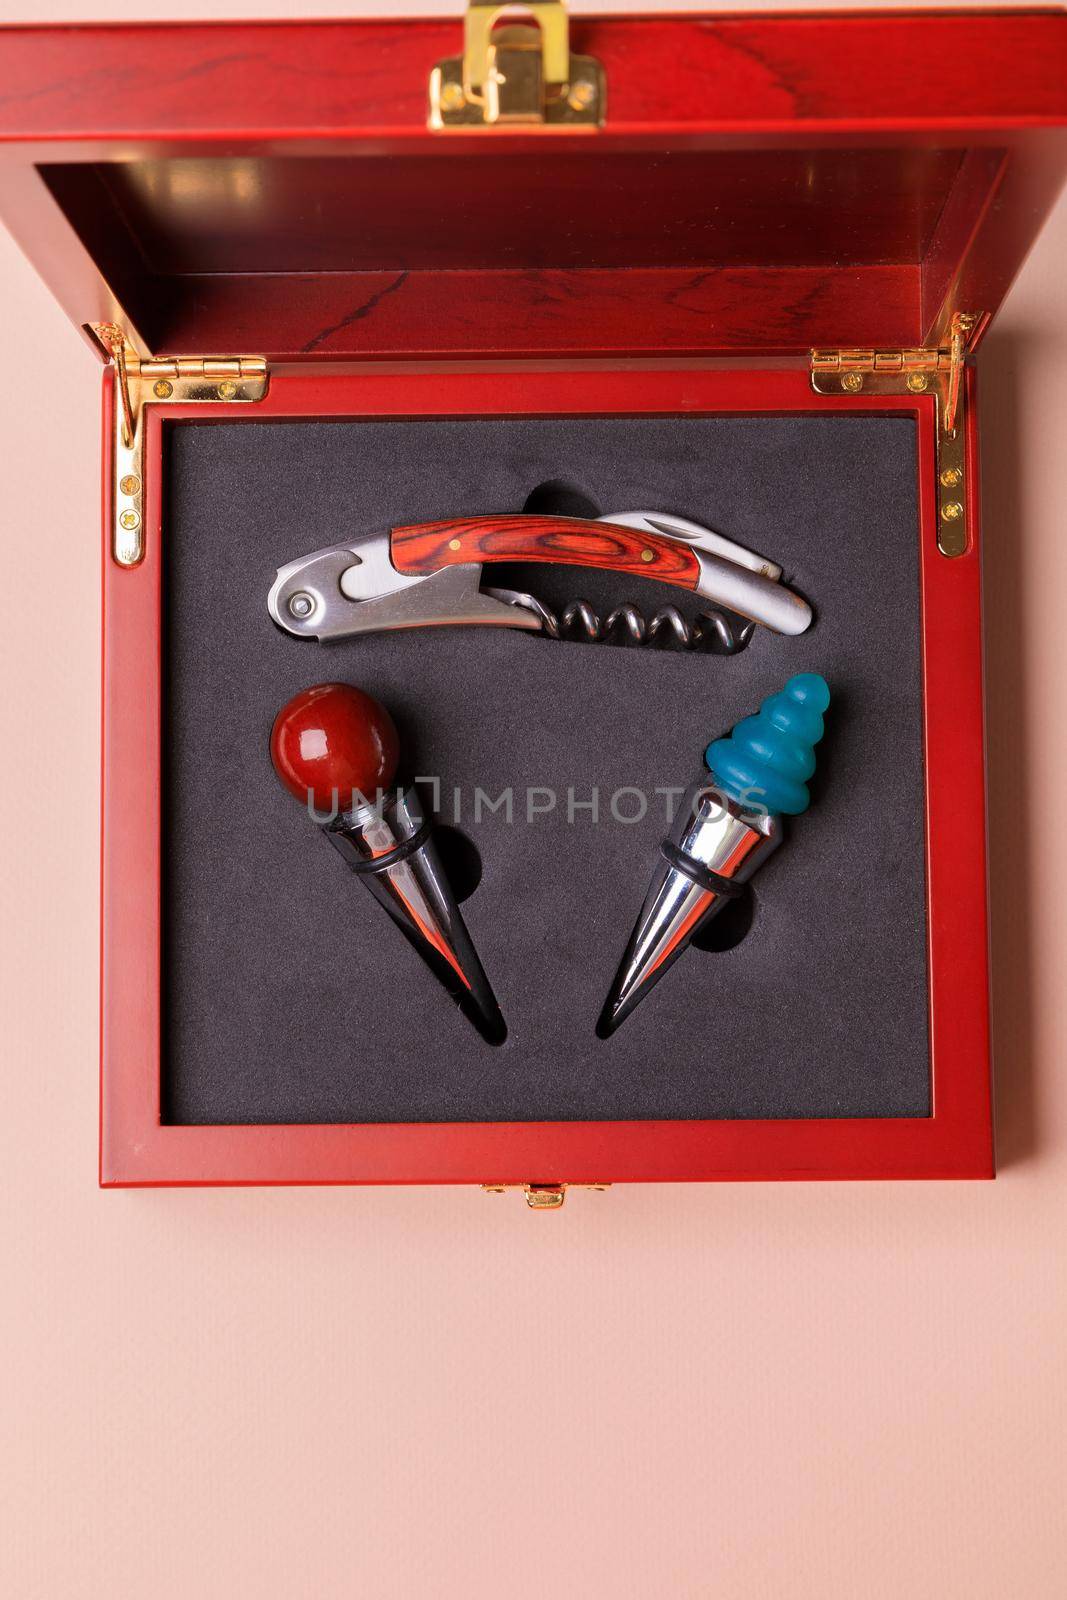 Gift set of corkscrew and removable lids. Wine corks and bottle openers in a wooden box on a pink background.